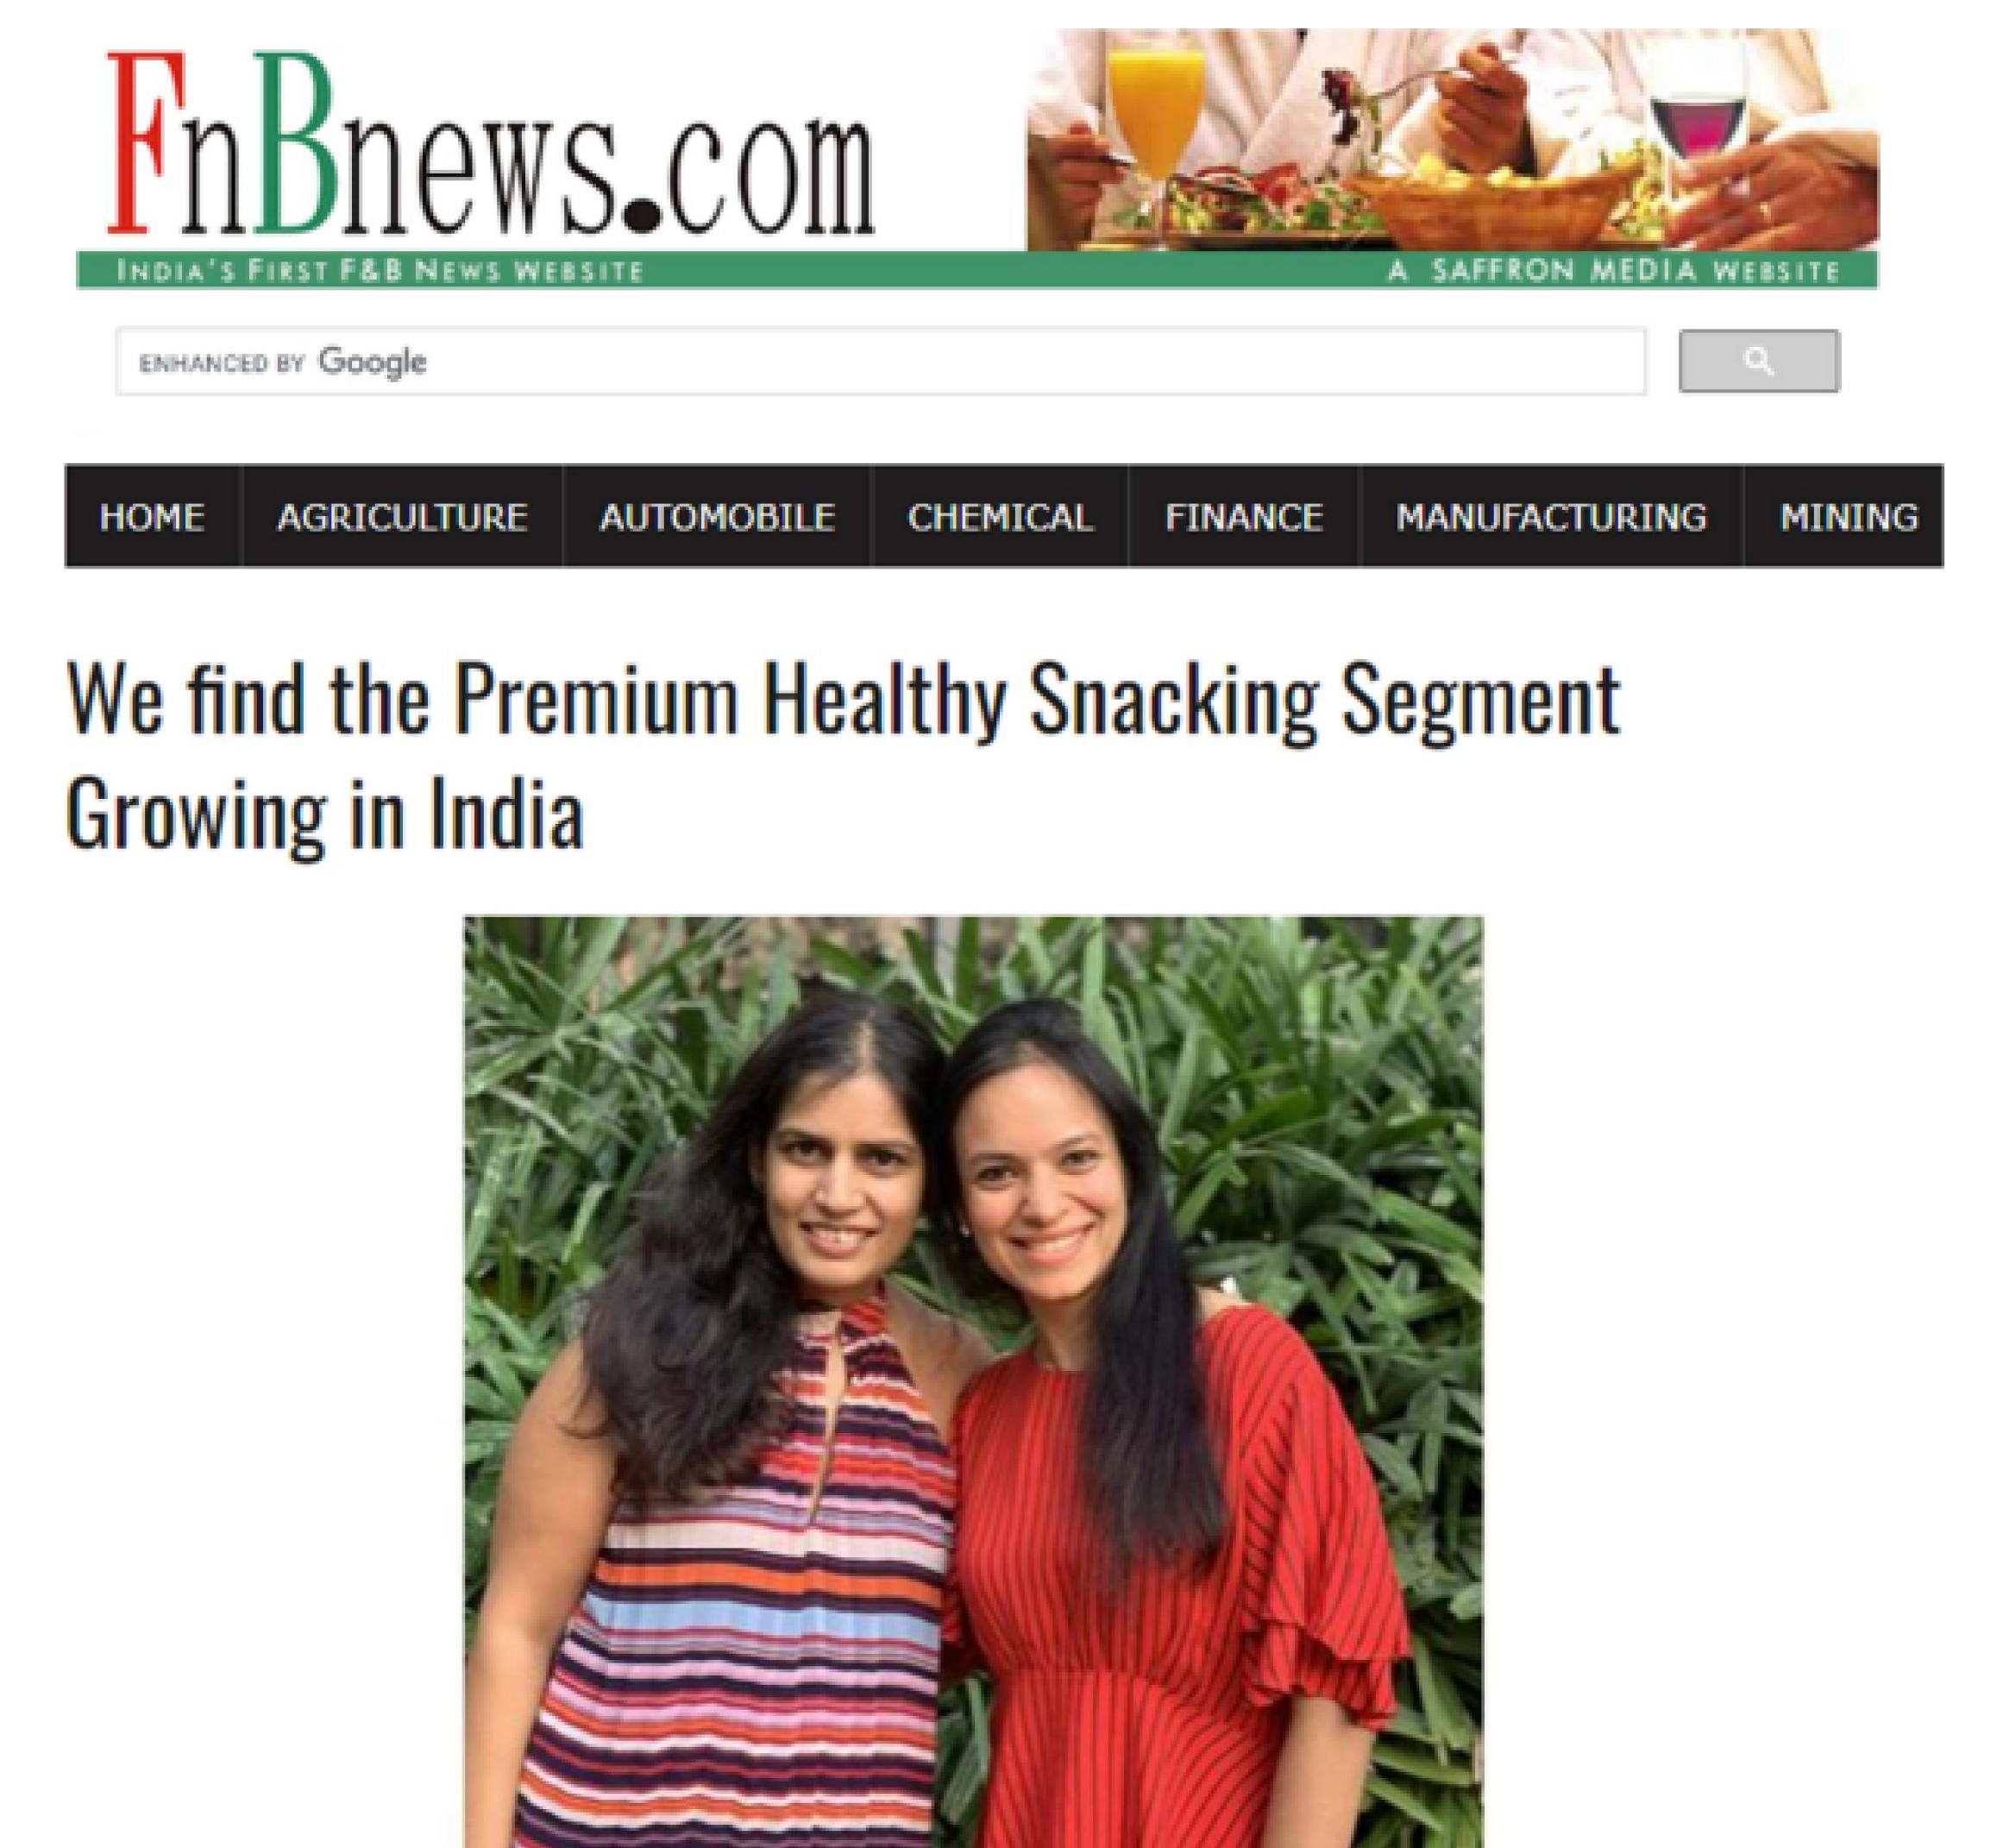 We find the Premium Healthy Snacking Segment Growing in India